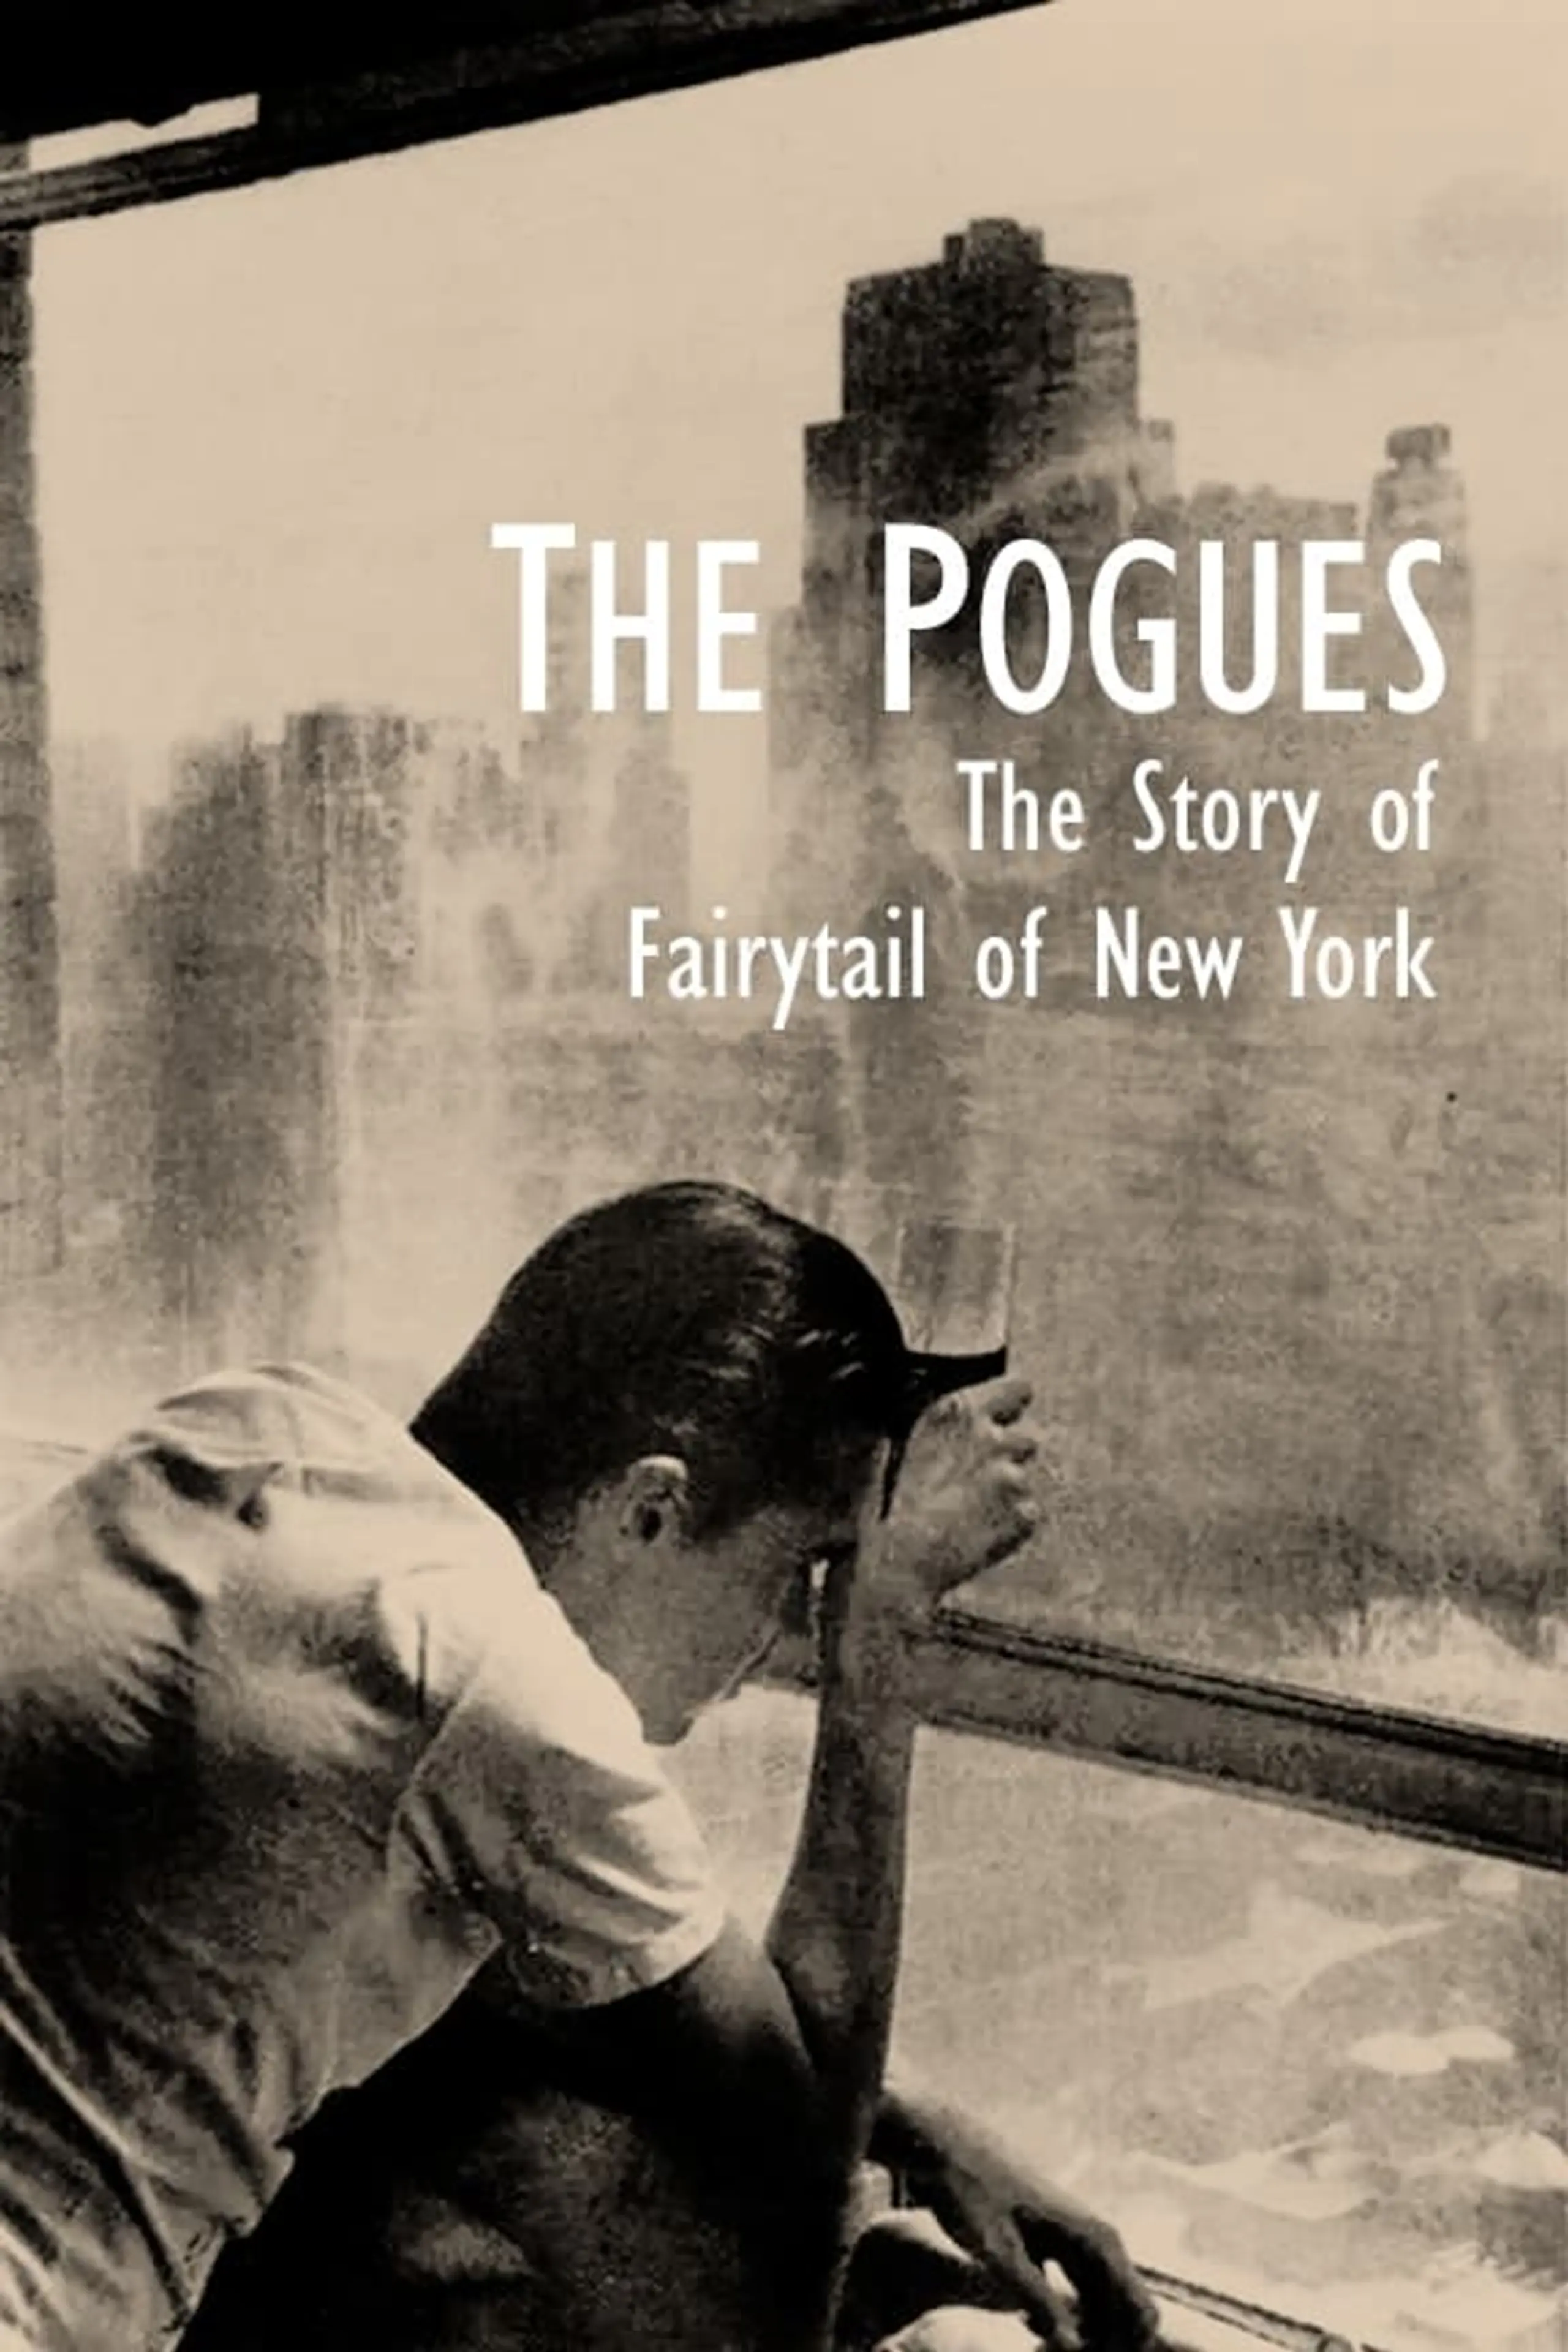 The Story of Fairytale of New York